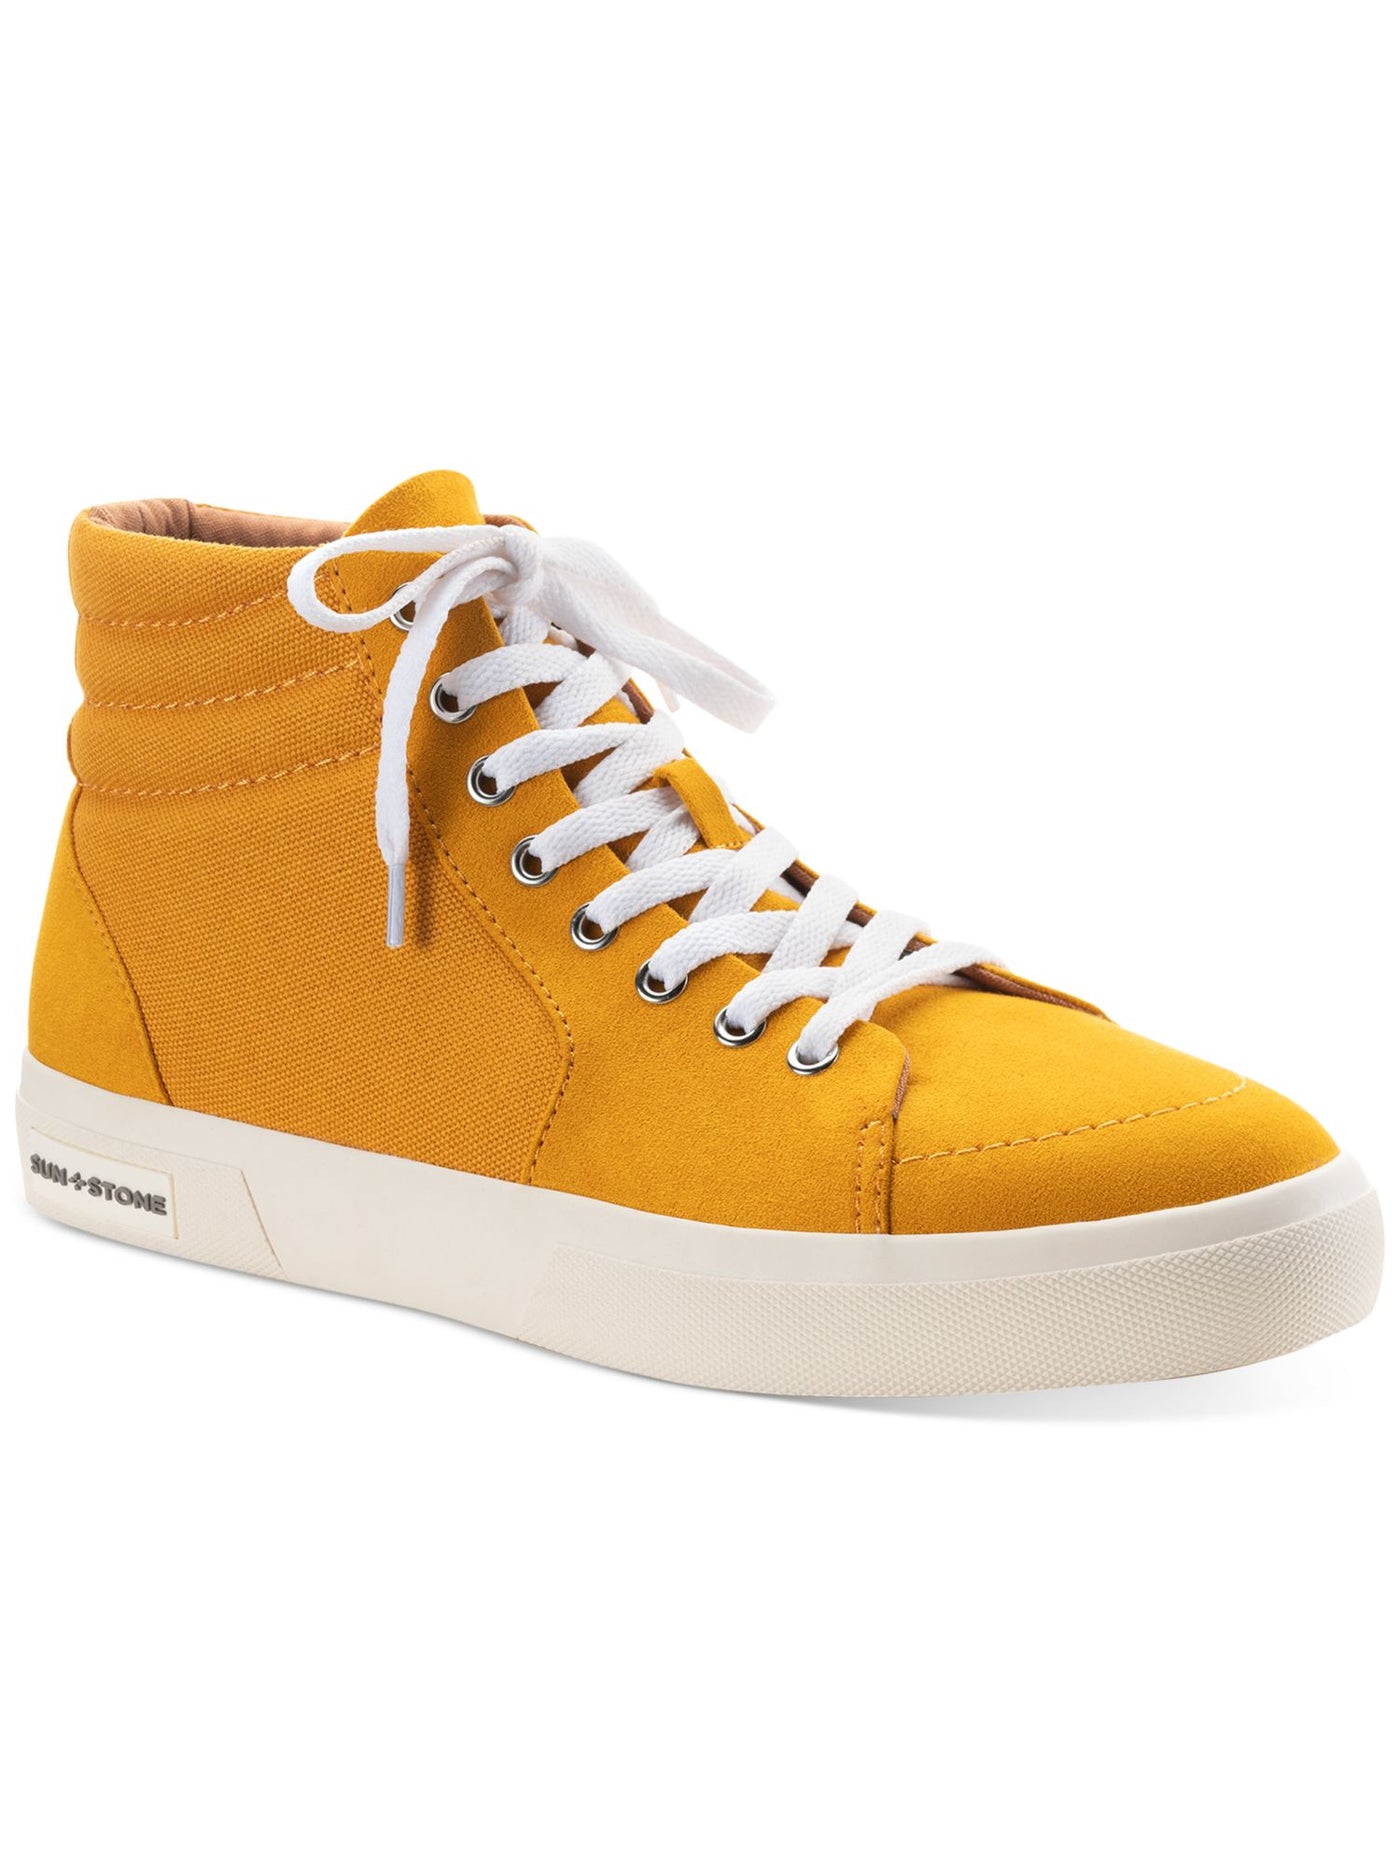 SUN STONE Mens Yellow Cushioned Jett Round Toe Platform Lace-Up Athletic Sneakers Shoes 7 M